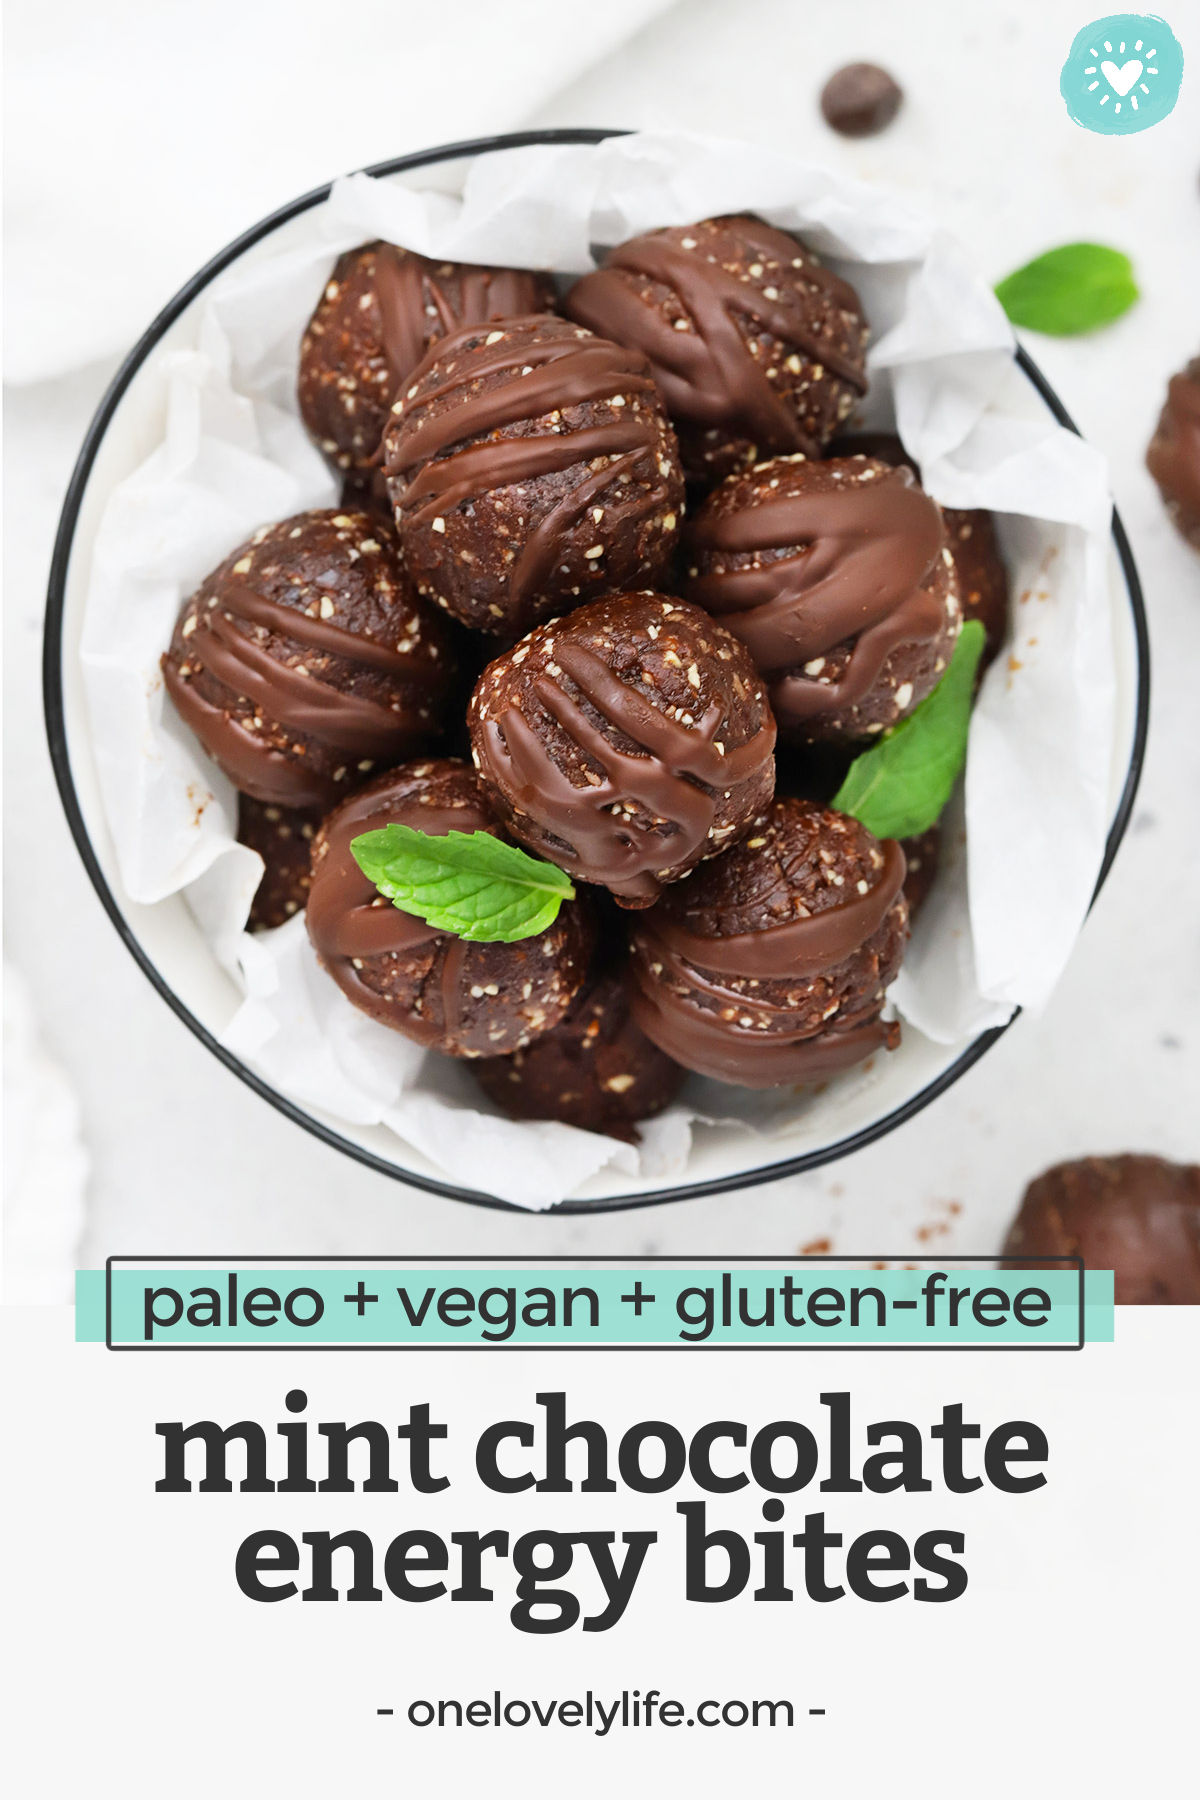 Thin Mint Energy Bites - These Mint Chocolate Energy Bites are a delicious snack or healthy treat! Made with simple ingredients, they're great for meal prep. (Vegan + Paleo + Gluten-Free) // Thin Mint Energy Bites // Mint Brownie Energy Bites // Chocolate Peppermint Energy Bites // Healthy Snack // Meal Prep Snack // Mint Chocolate Energy Balls #vegan #glutenfree #paleo #energybites #energyballs